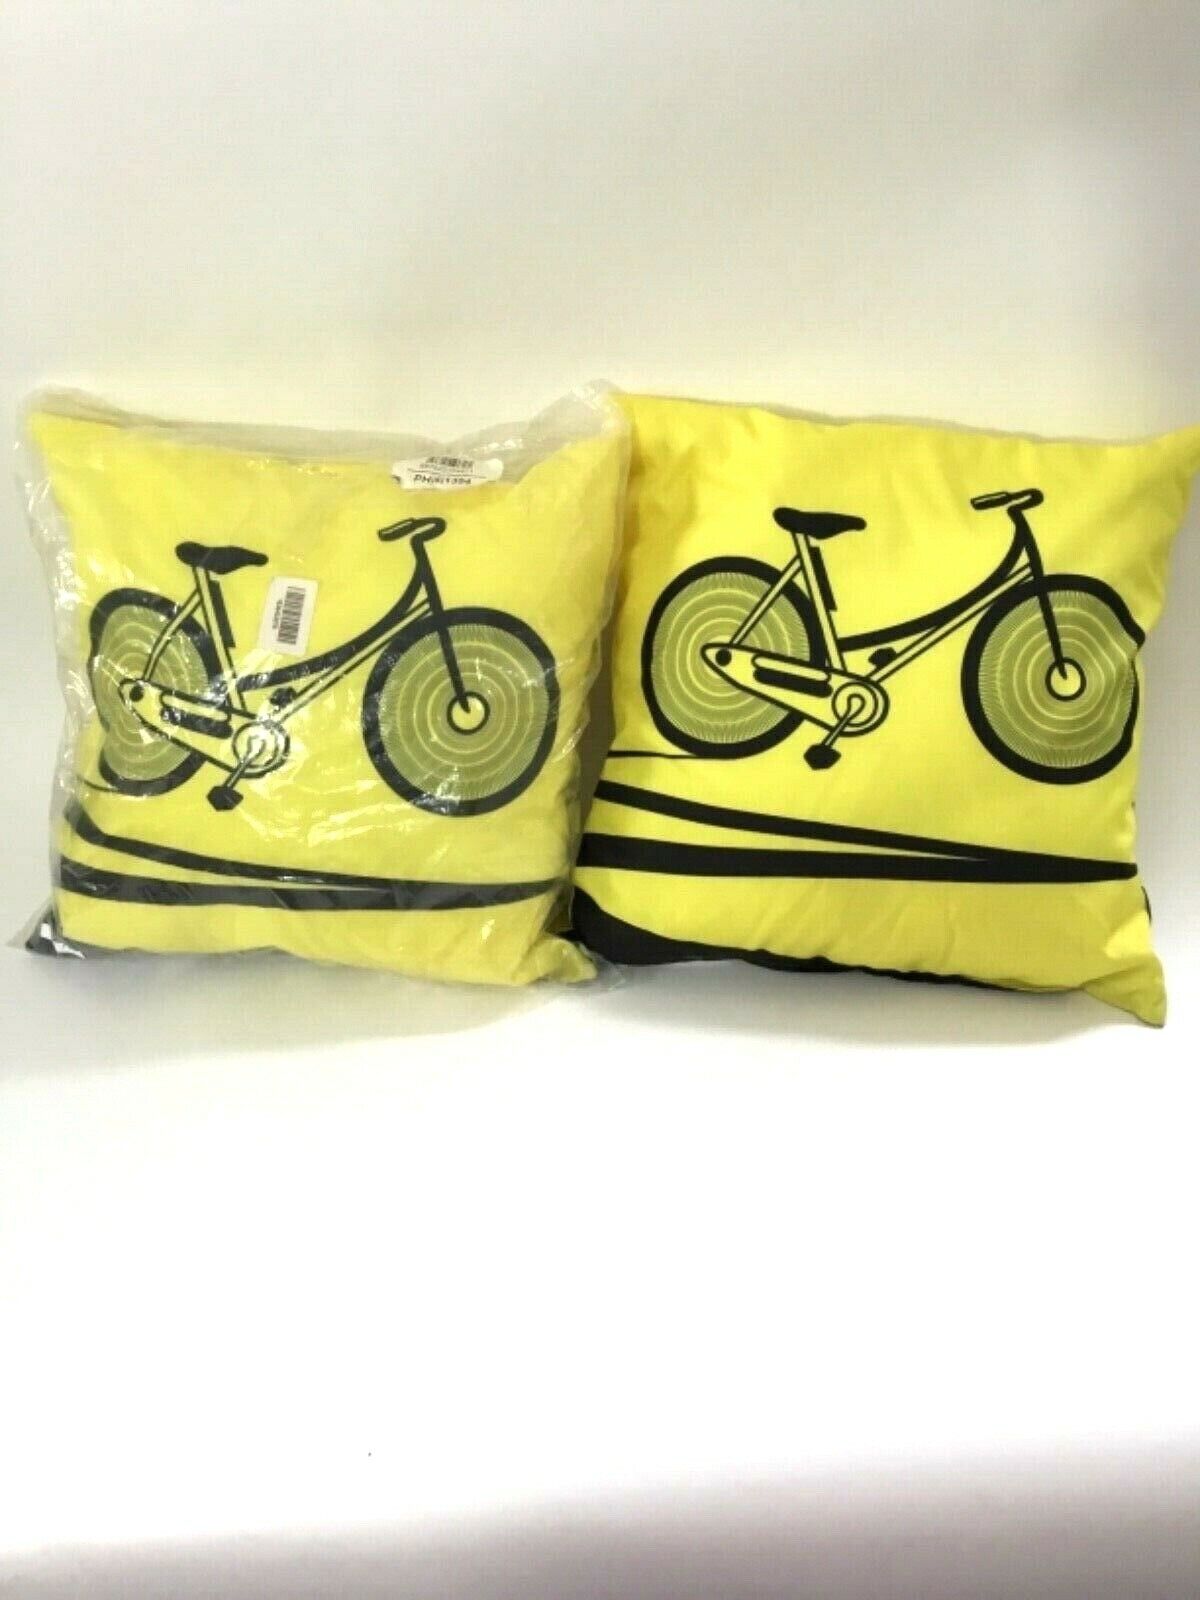 Pair of 2 Large Yellow Deny Designs Pillows w/ Modern Bicycle Design, 18”x18” Без бренда